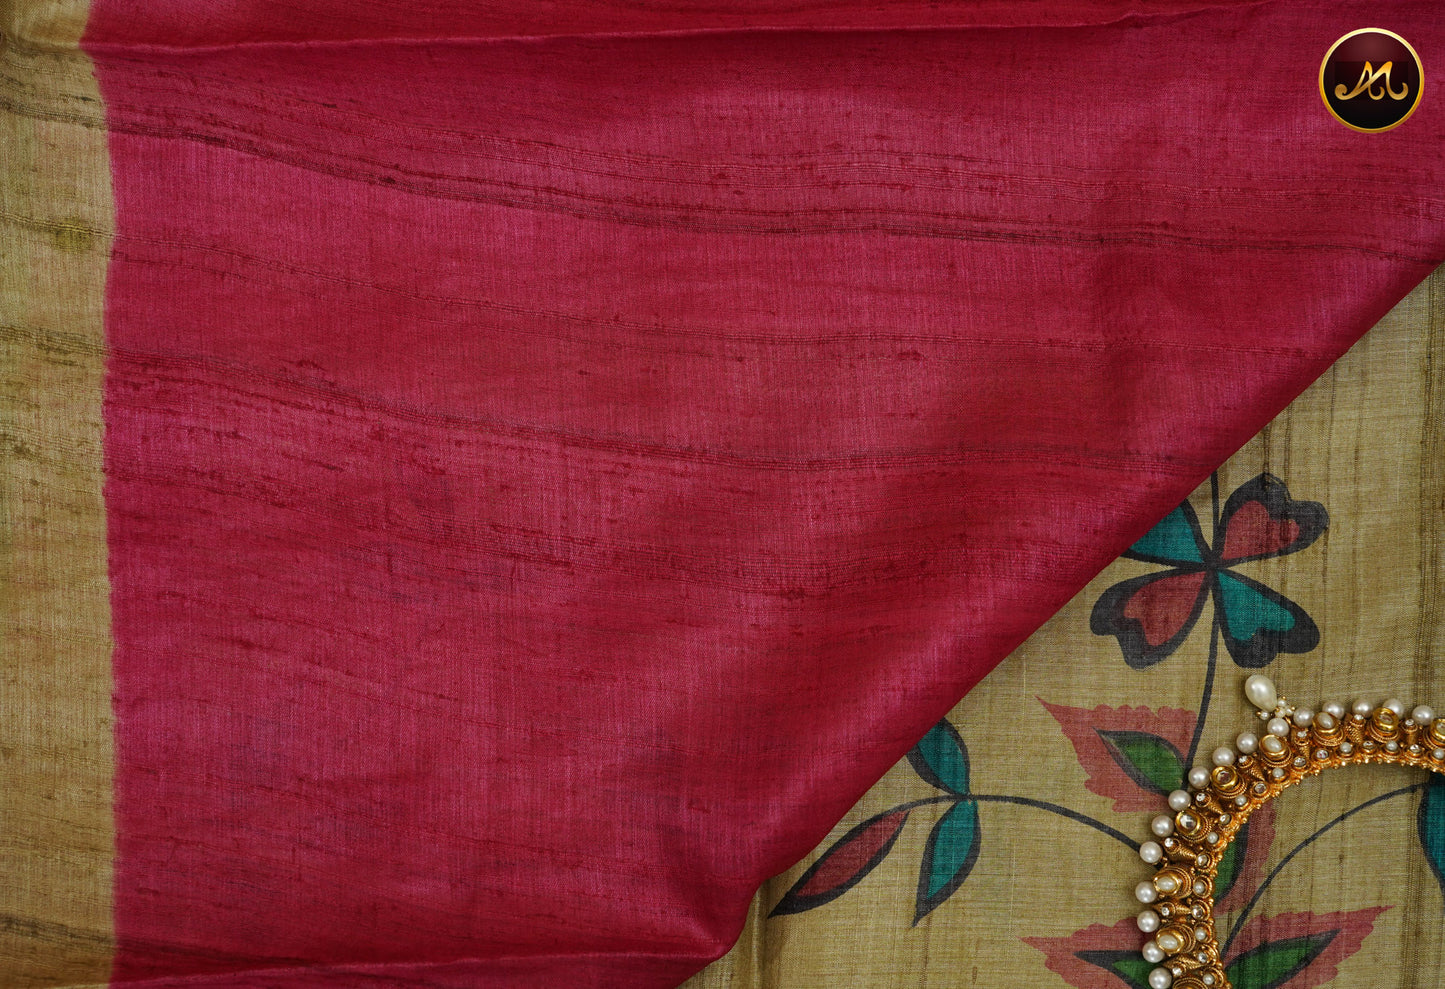 Pure tussar silk saree in olive green with rani pink combination with hand brushed design all over the body